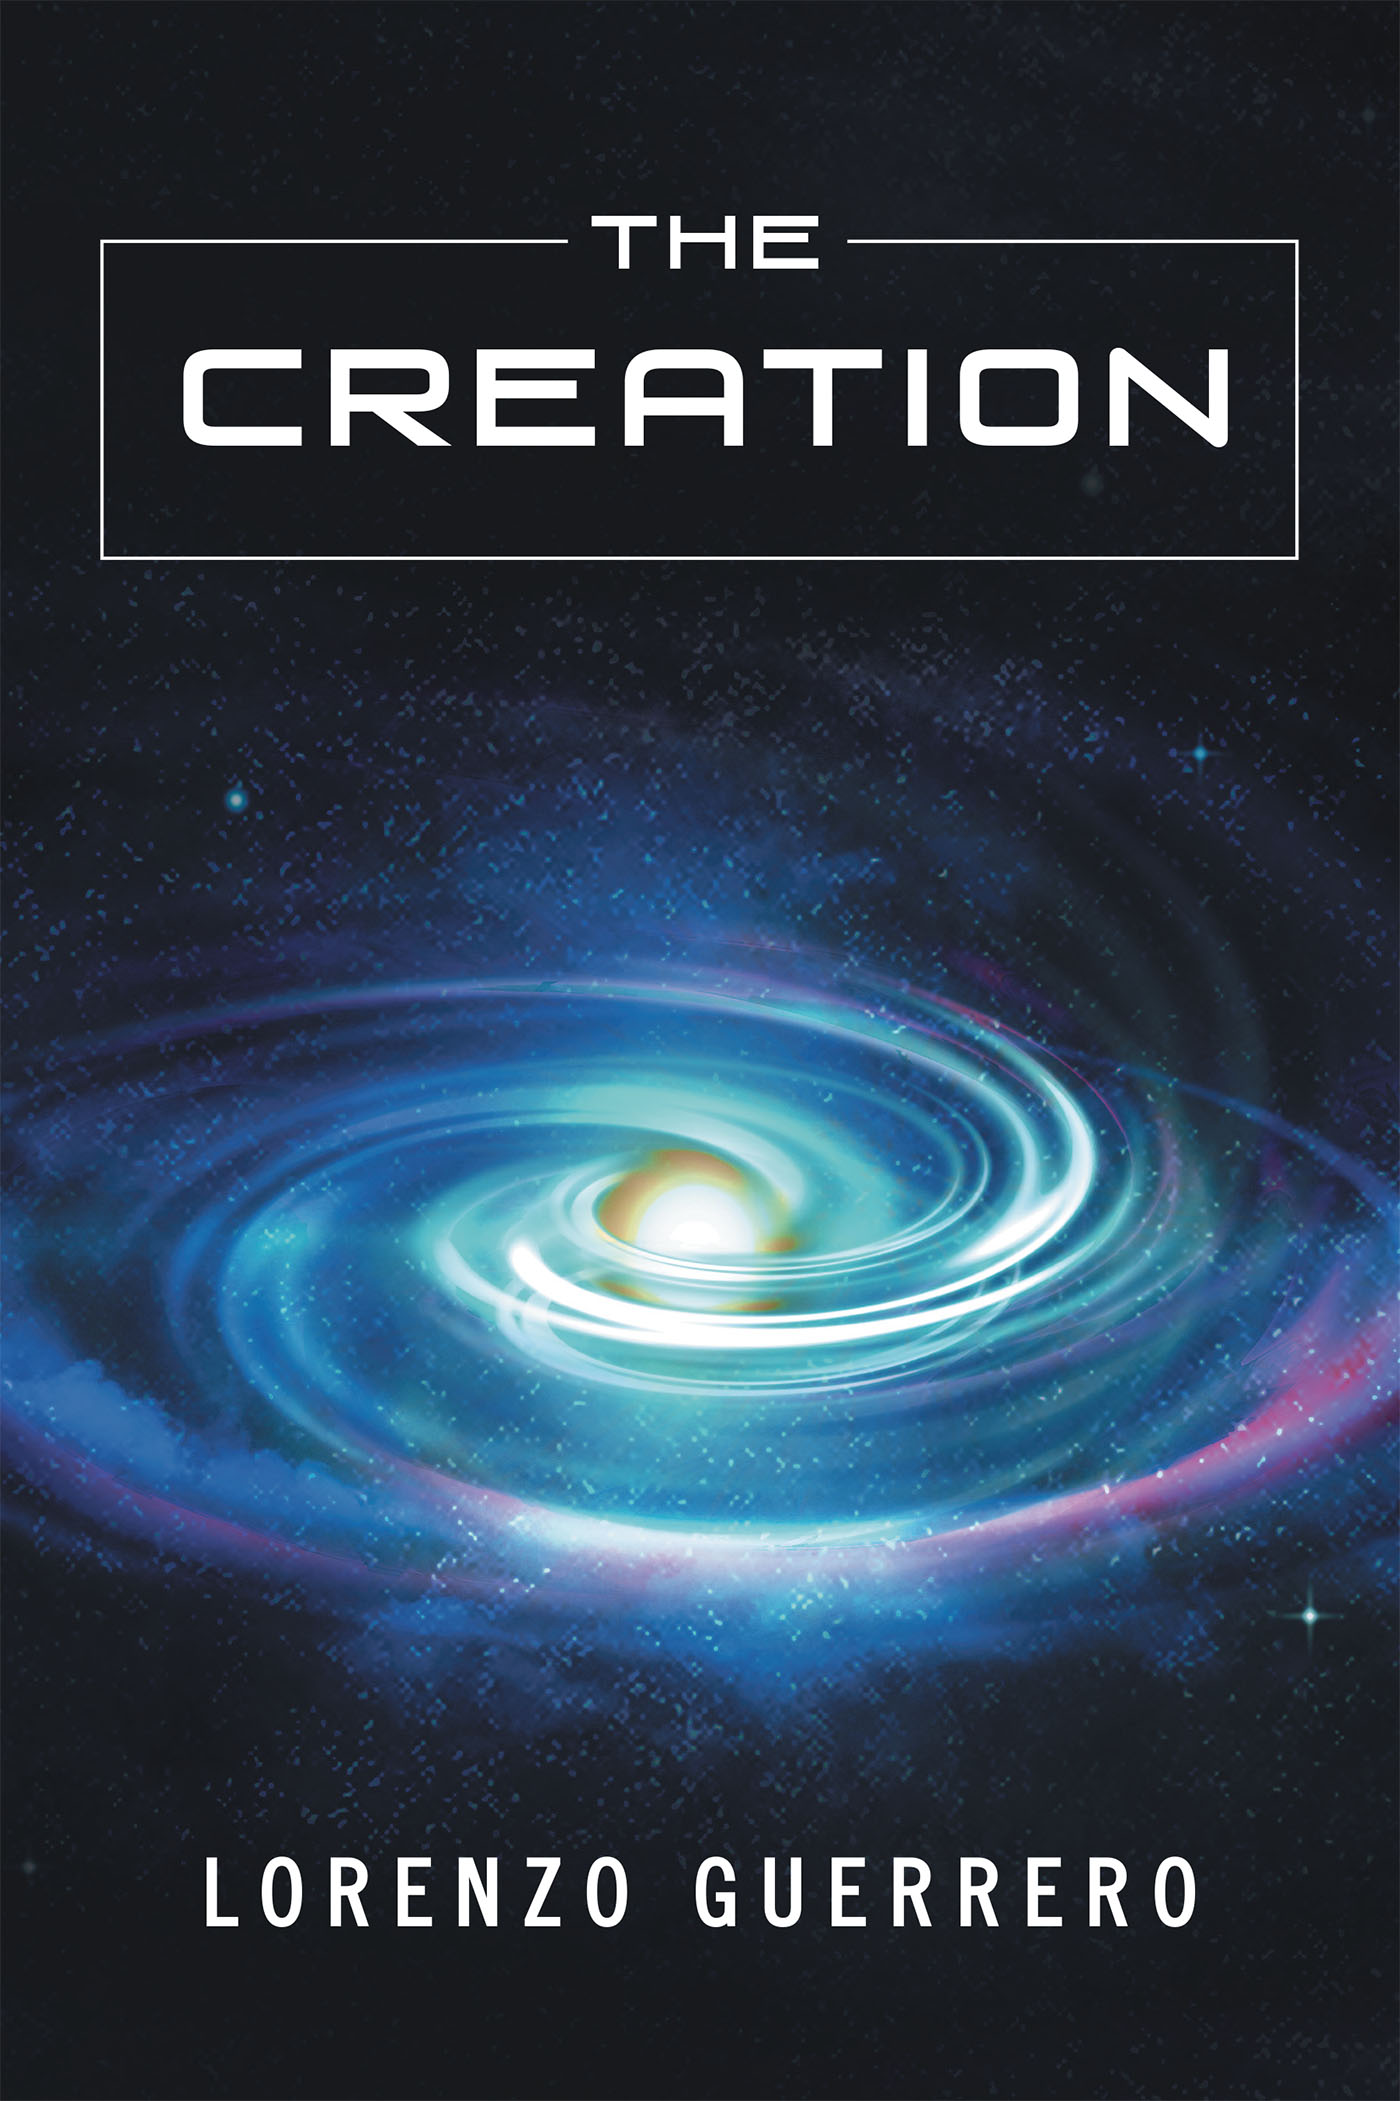 The Creation Cover Image